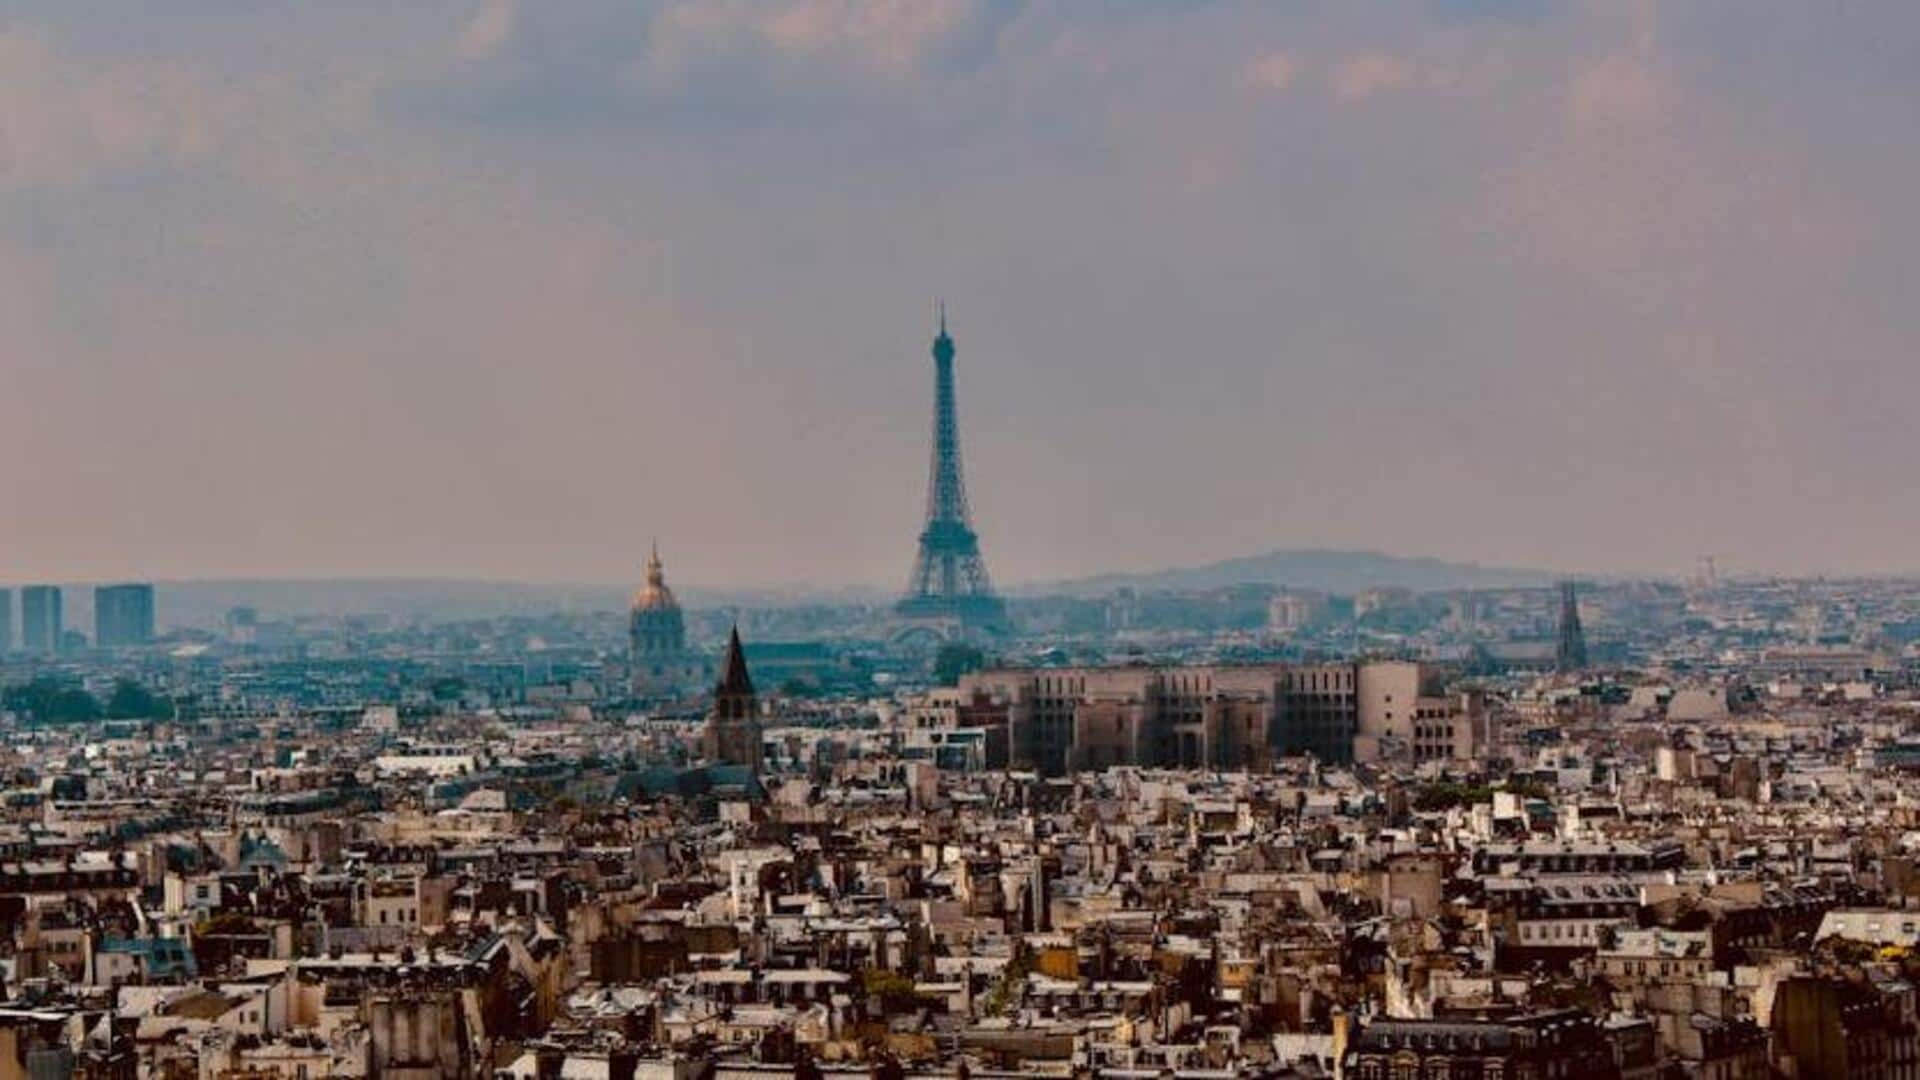 Paris' palatial escapes: Where to stay in City of Light